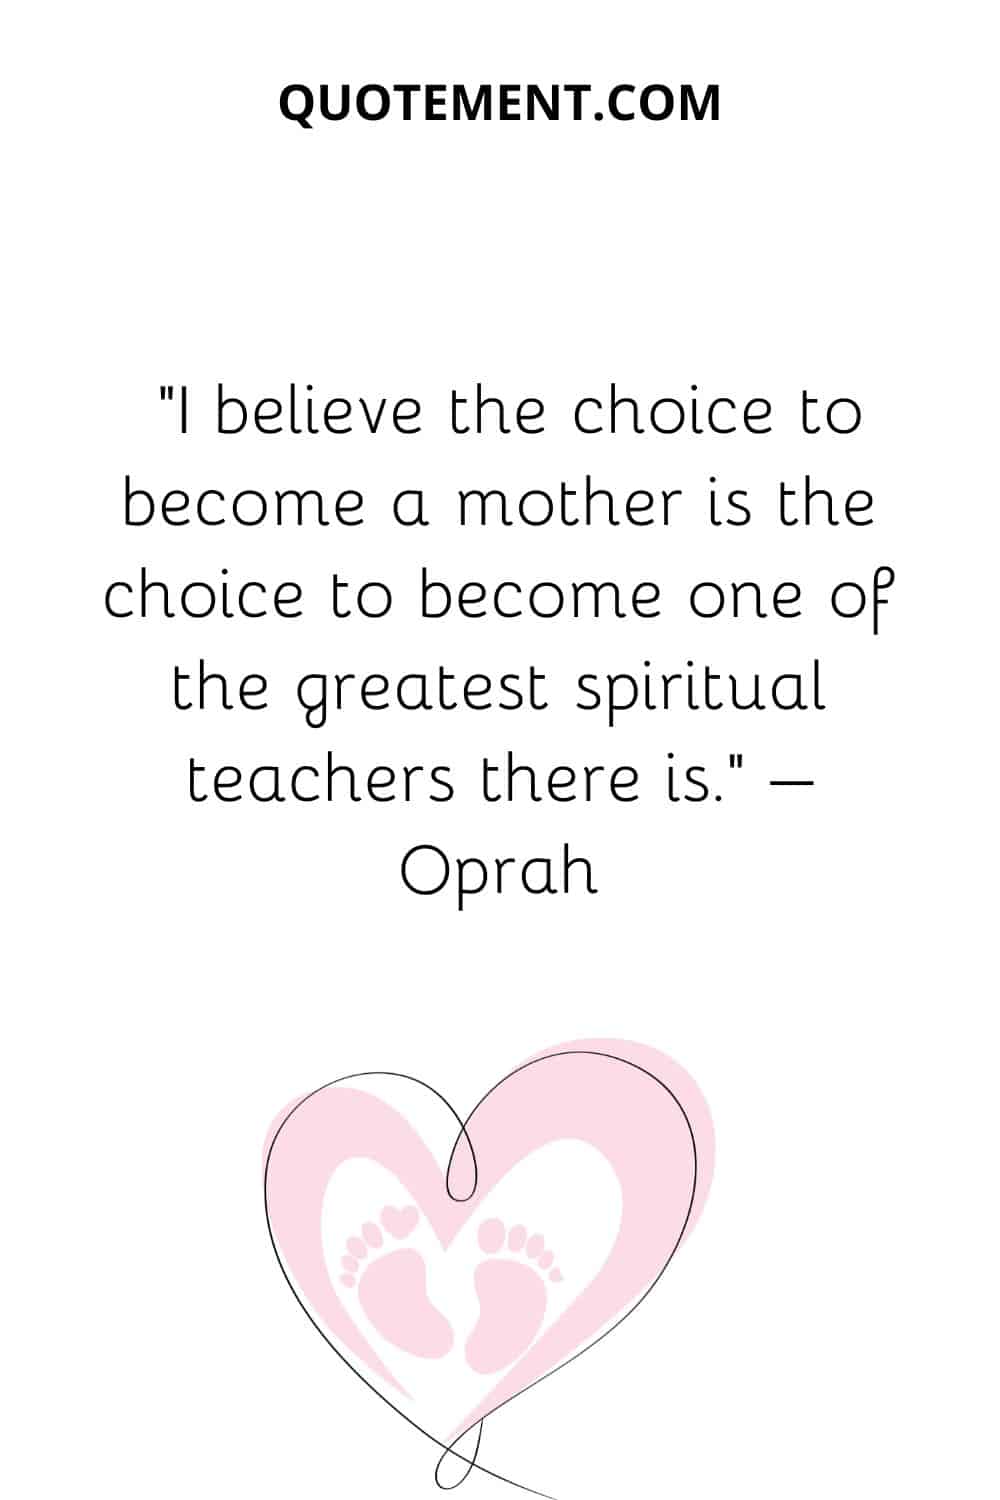 I believe the choice to become a mother is the choice to become one of the greatest spiritual teachers there is